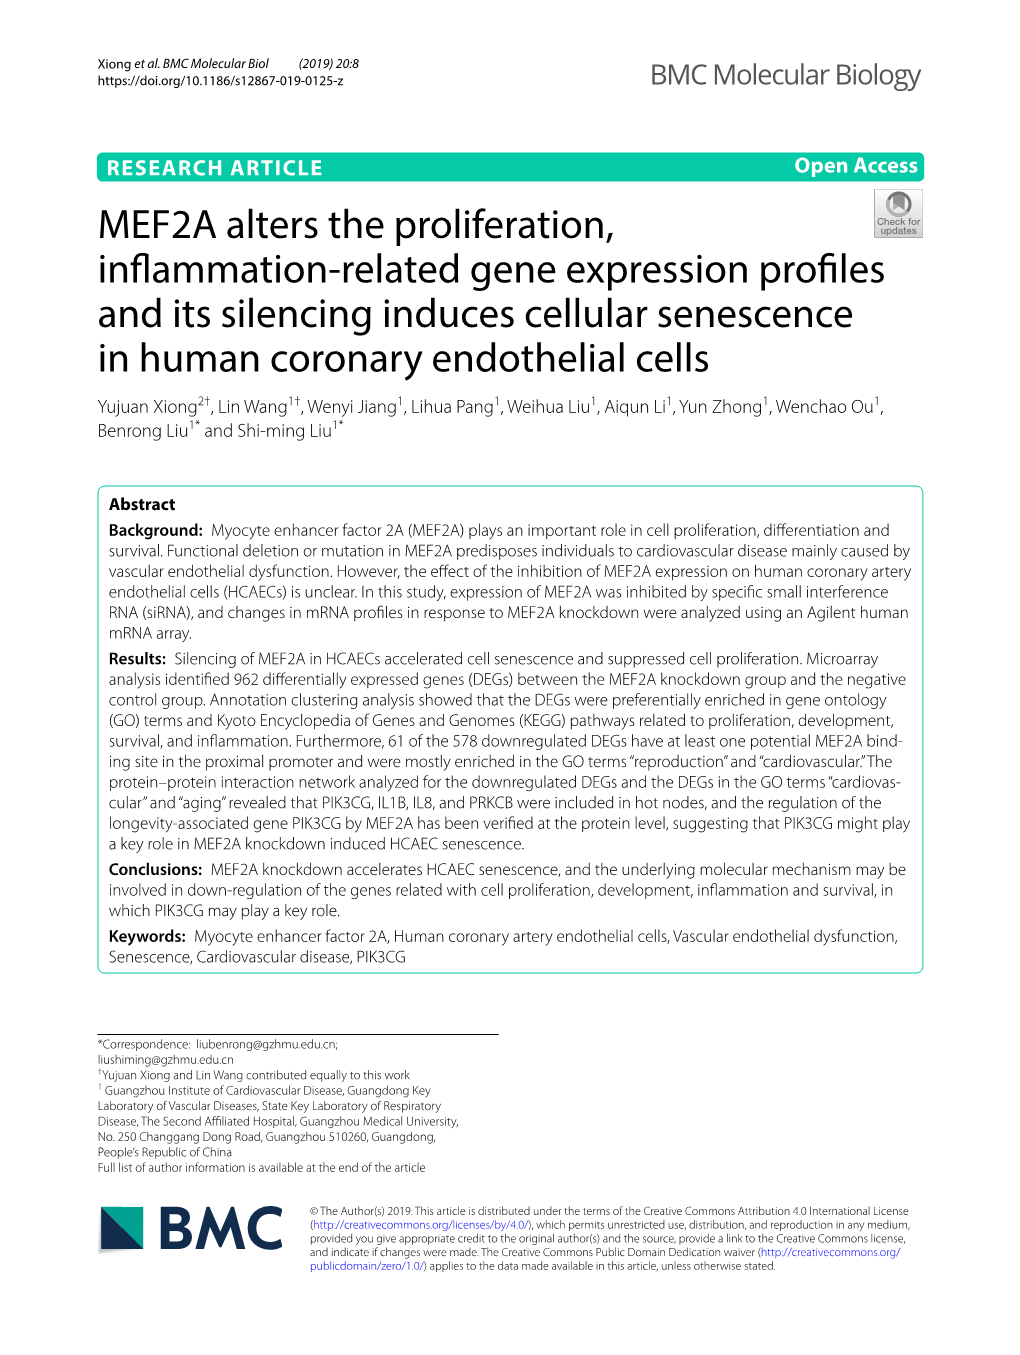 MEF2A Alters the Proliferation, Inflammation-Related Gene